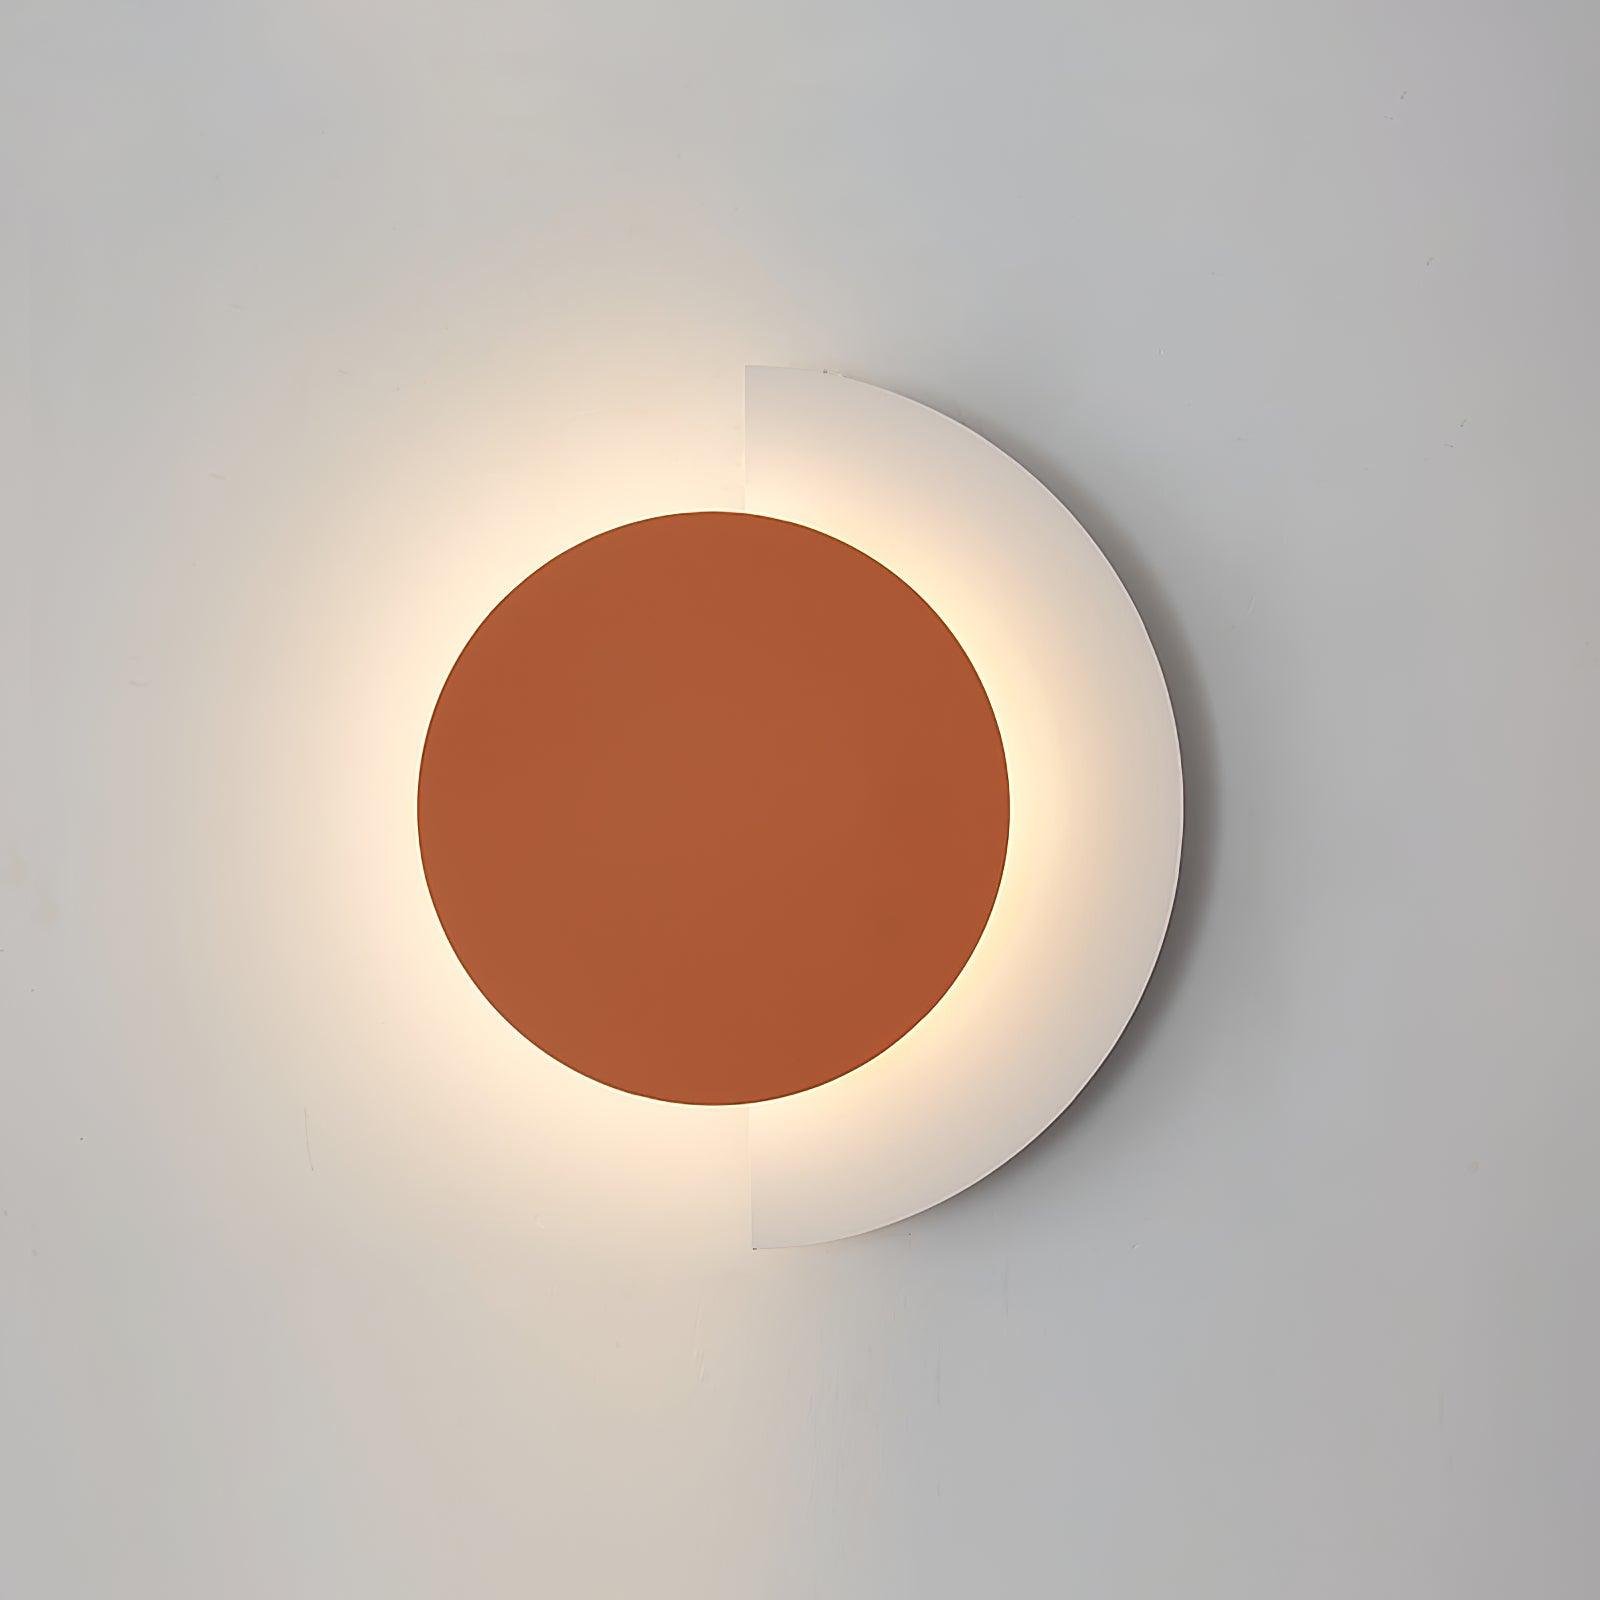 Abstract Art Sconce with Rounded Design ∅ 23″ x H 25.6″ , Dia 58.5cm x H 65cm , Orange and White Color Scheme, Emitting Cool Lighting